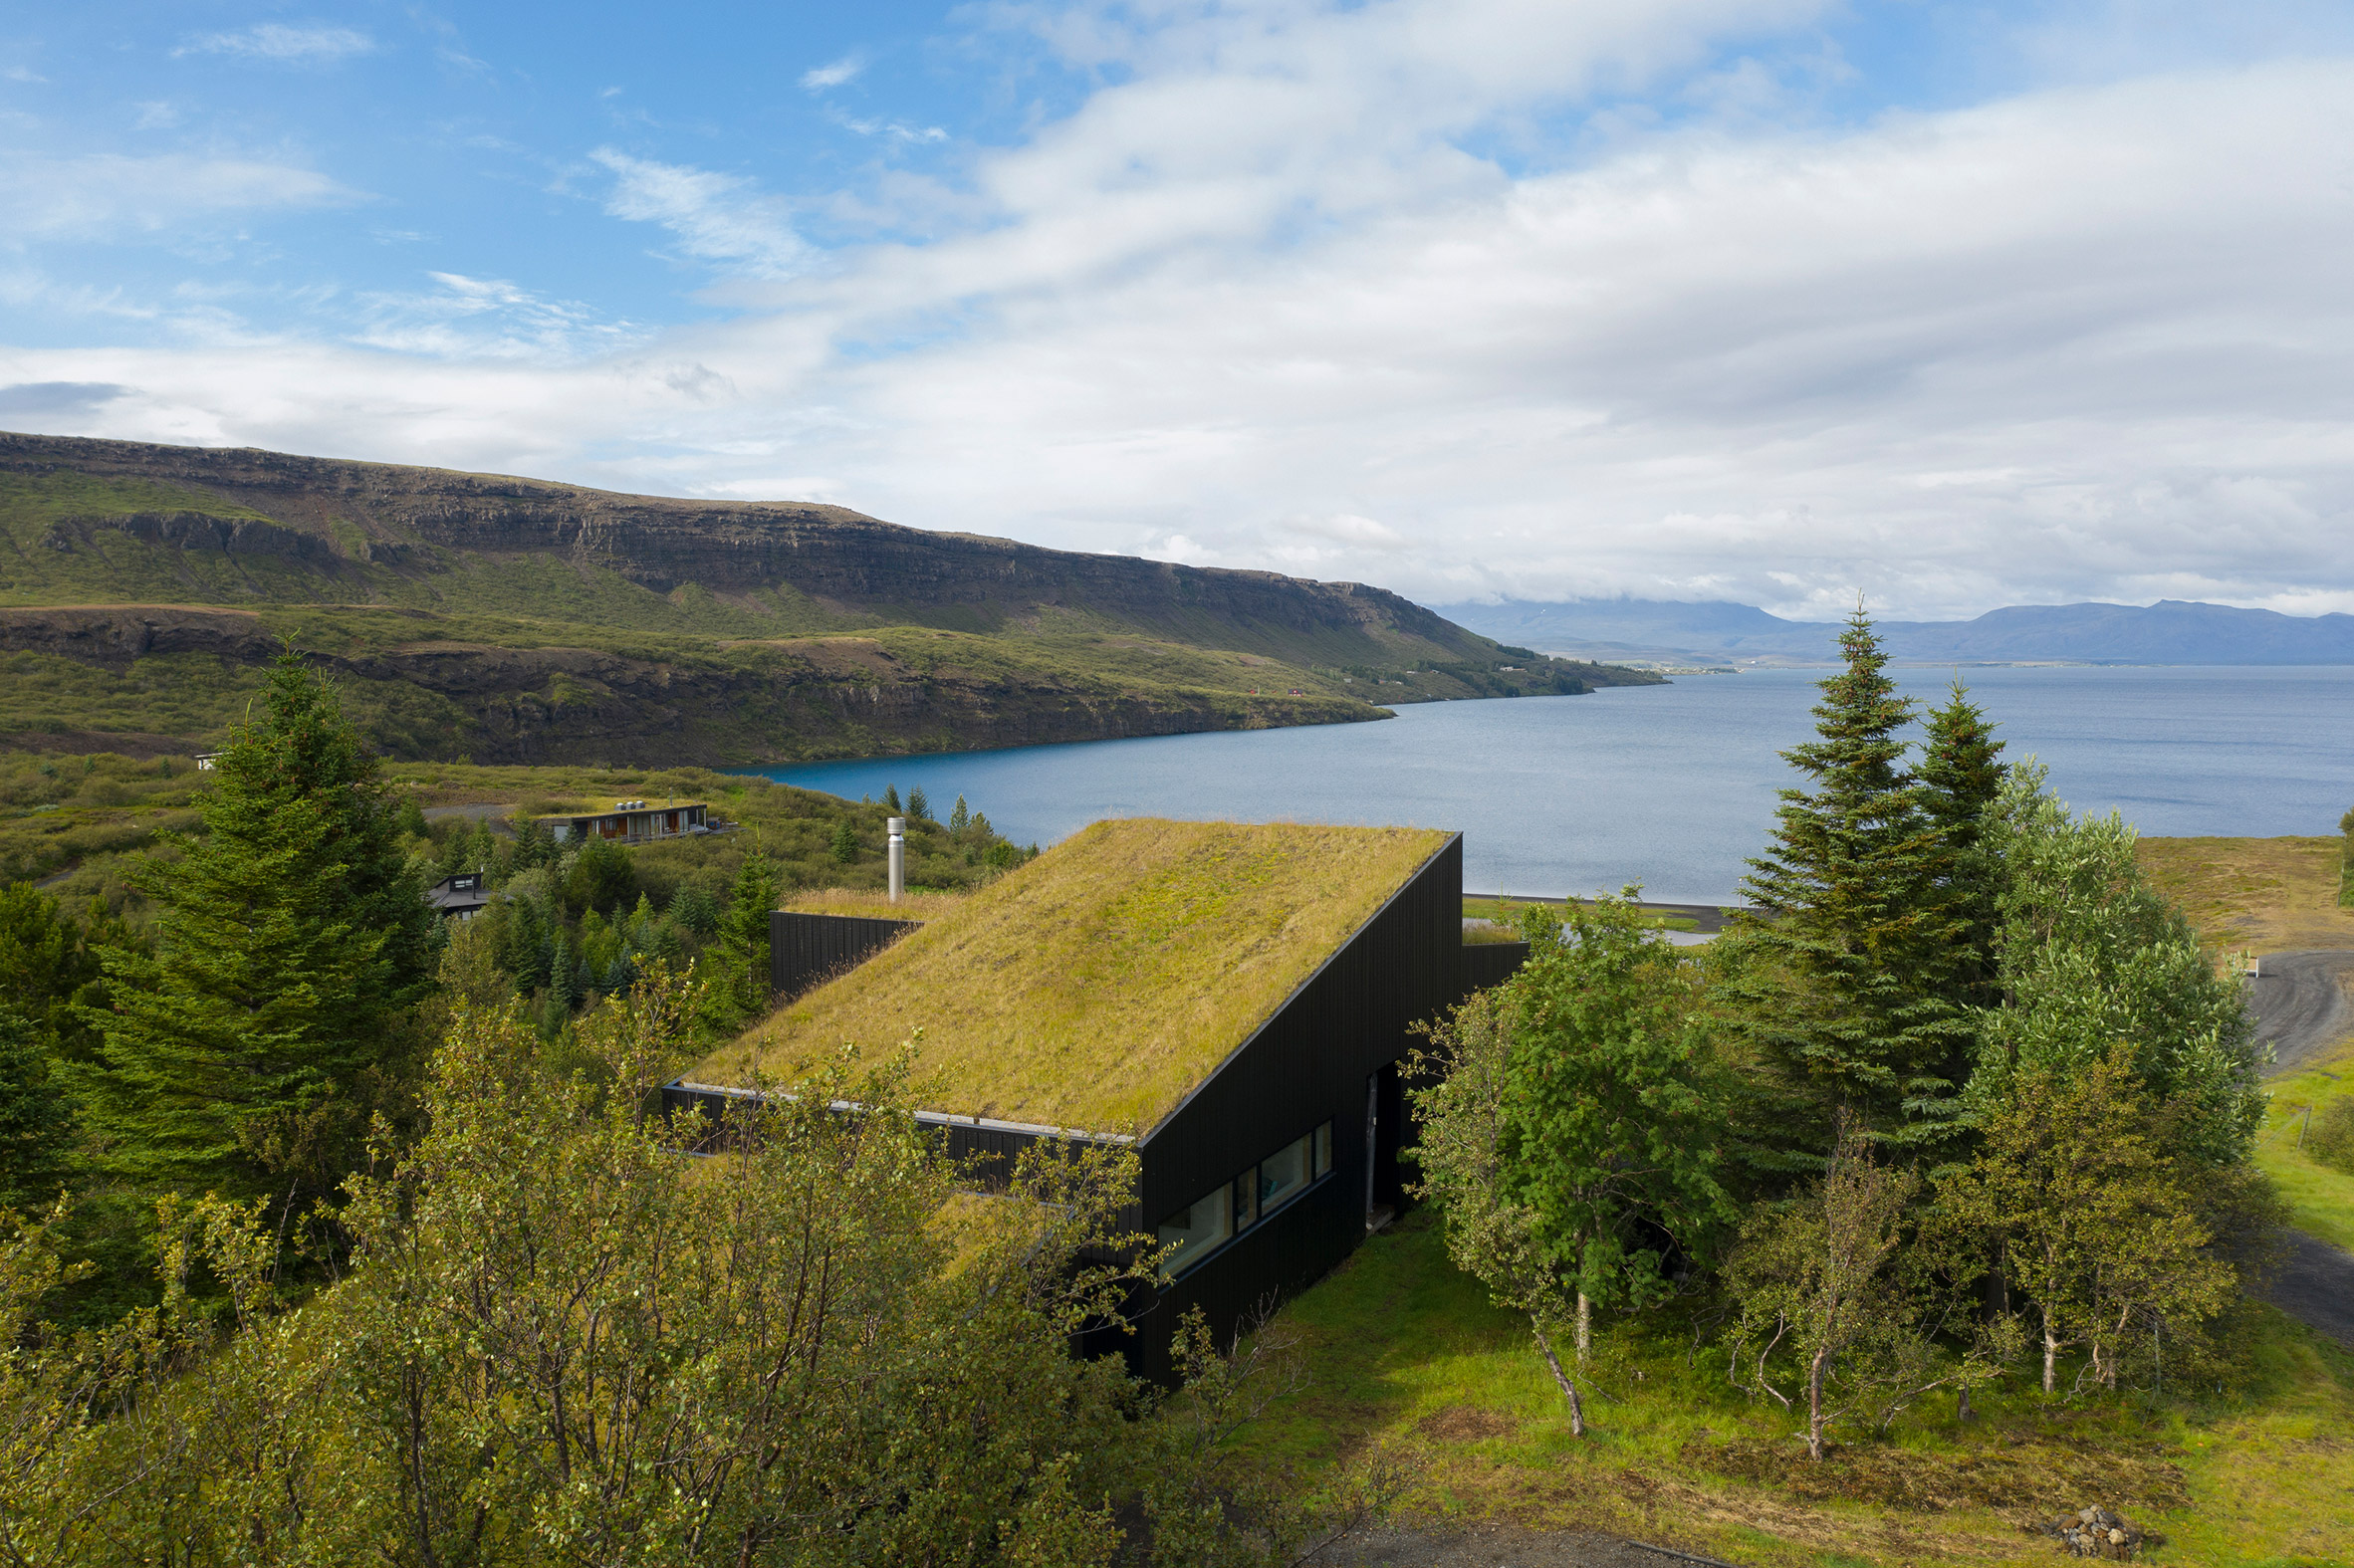 A house with a sloped green roof overlooking Lake Thingvallavatn